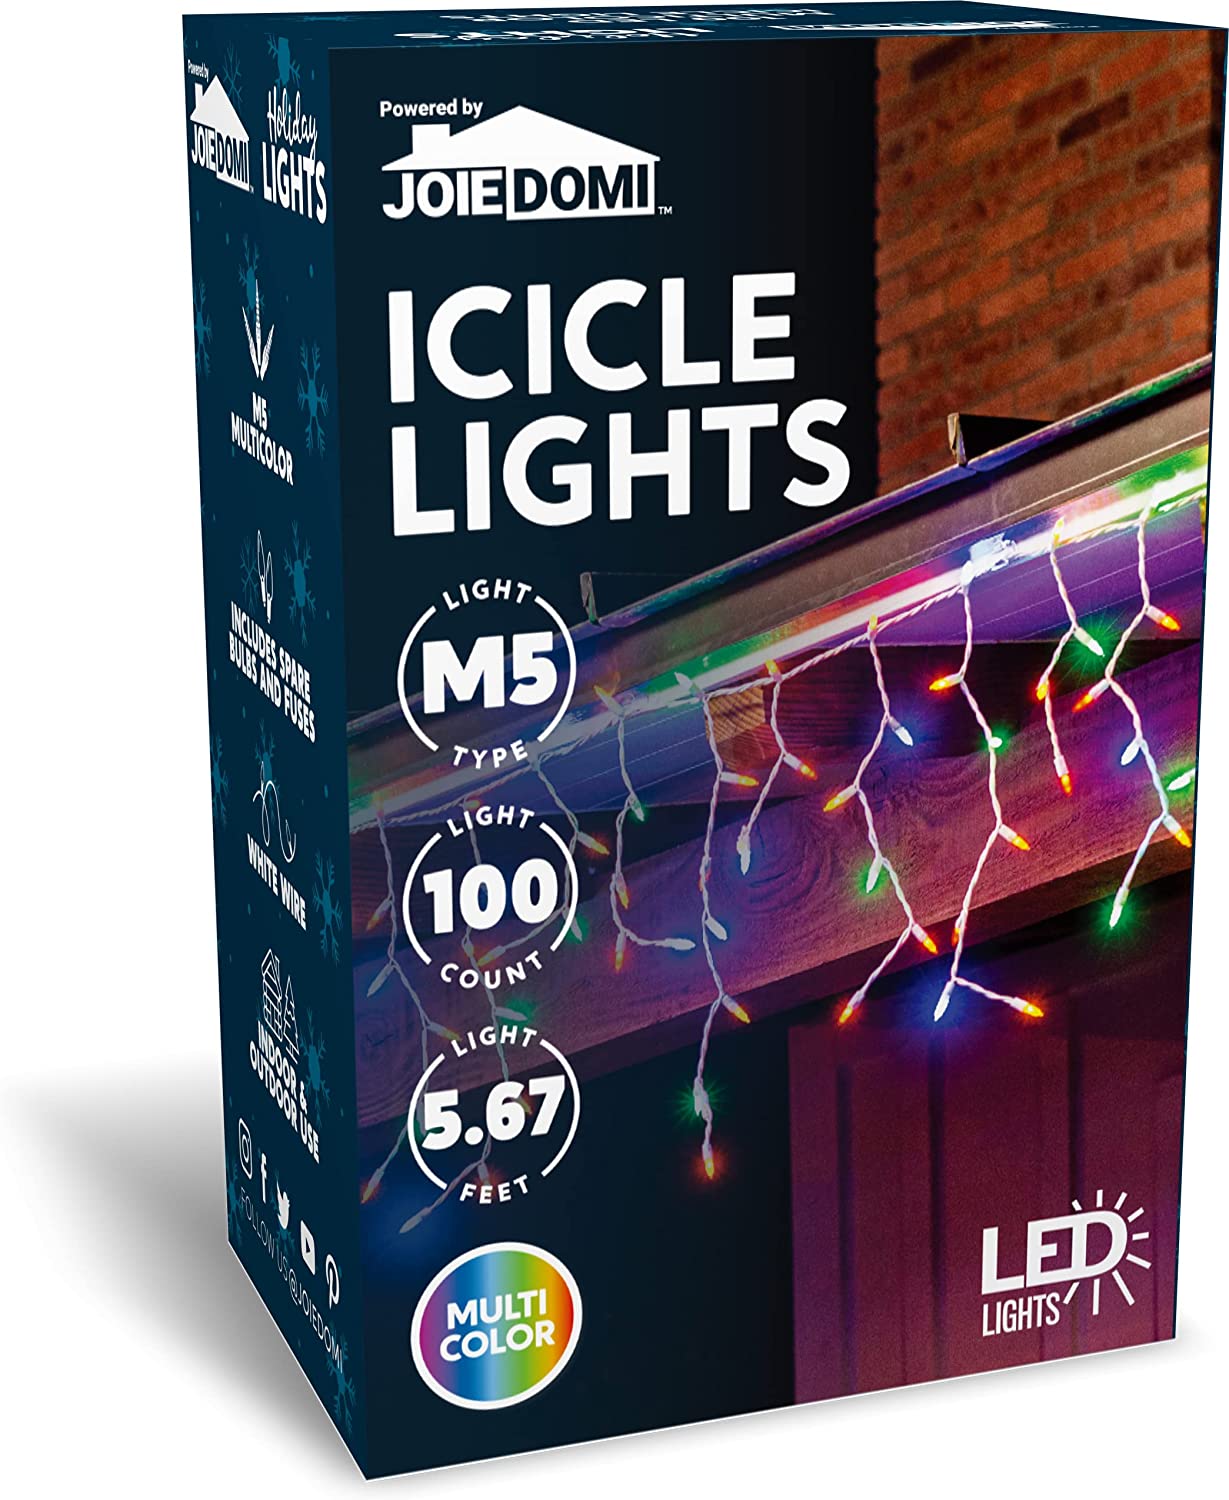 100 LED Christmas Icicle Lights Multicolor